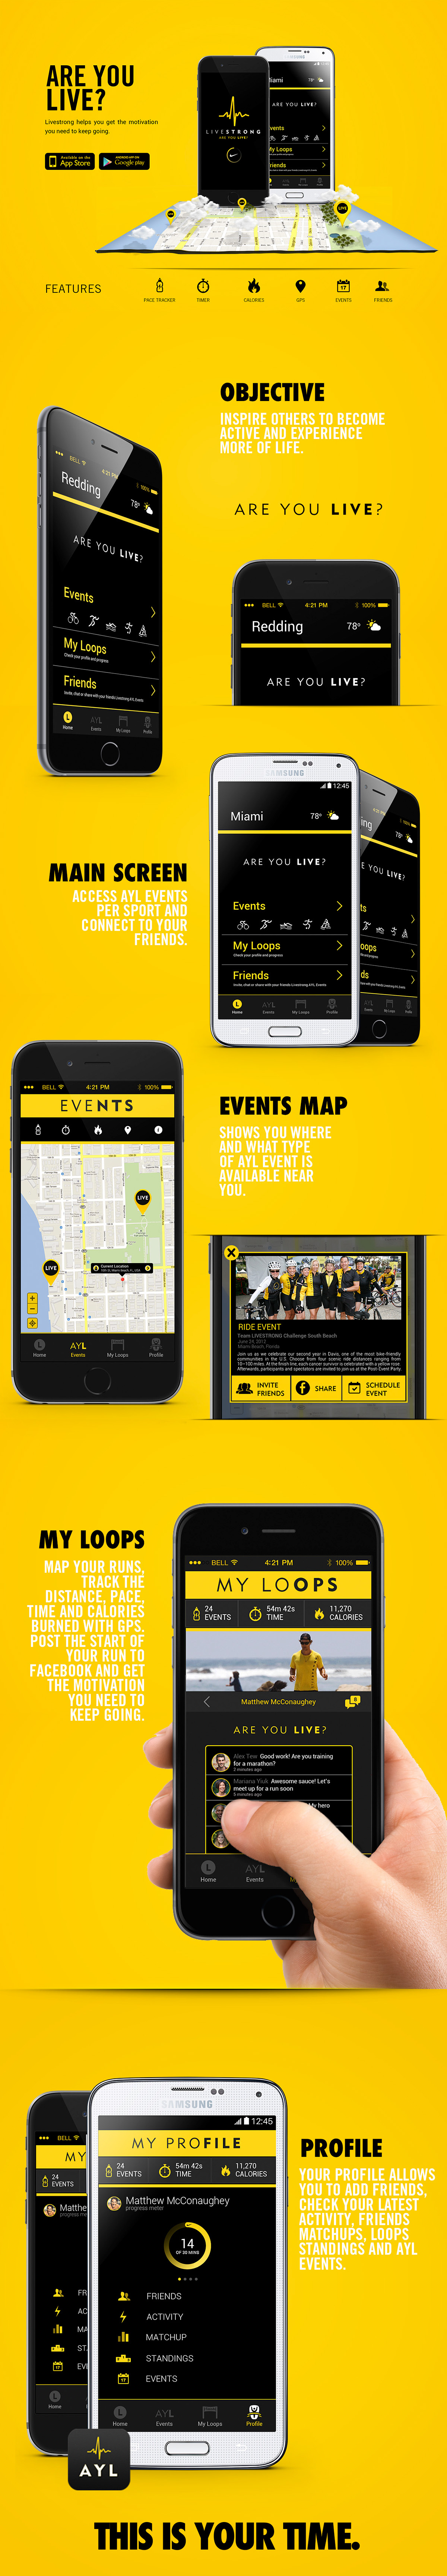 Livestrong  mobile app  Application  iphone  android  track  active  sports  profile  exercise Nike alive  UI  UX